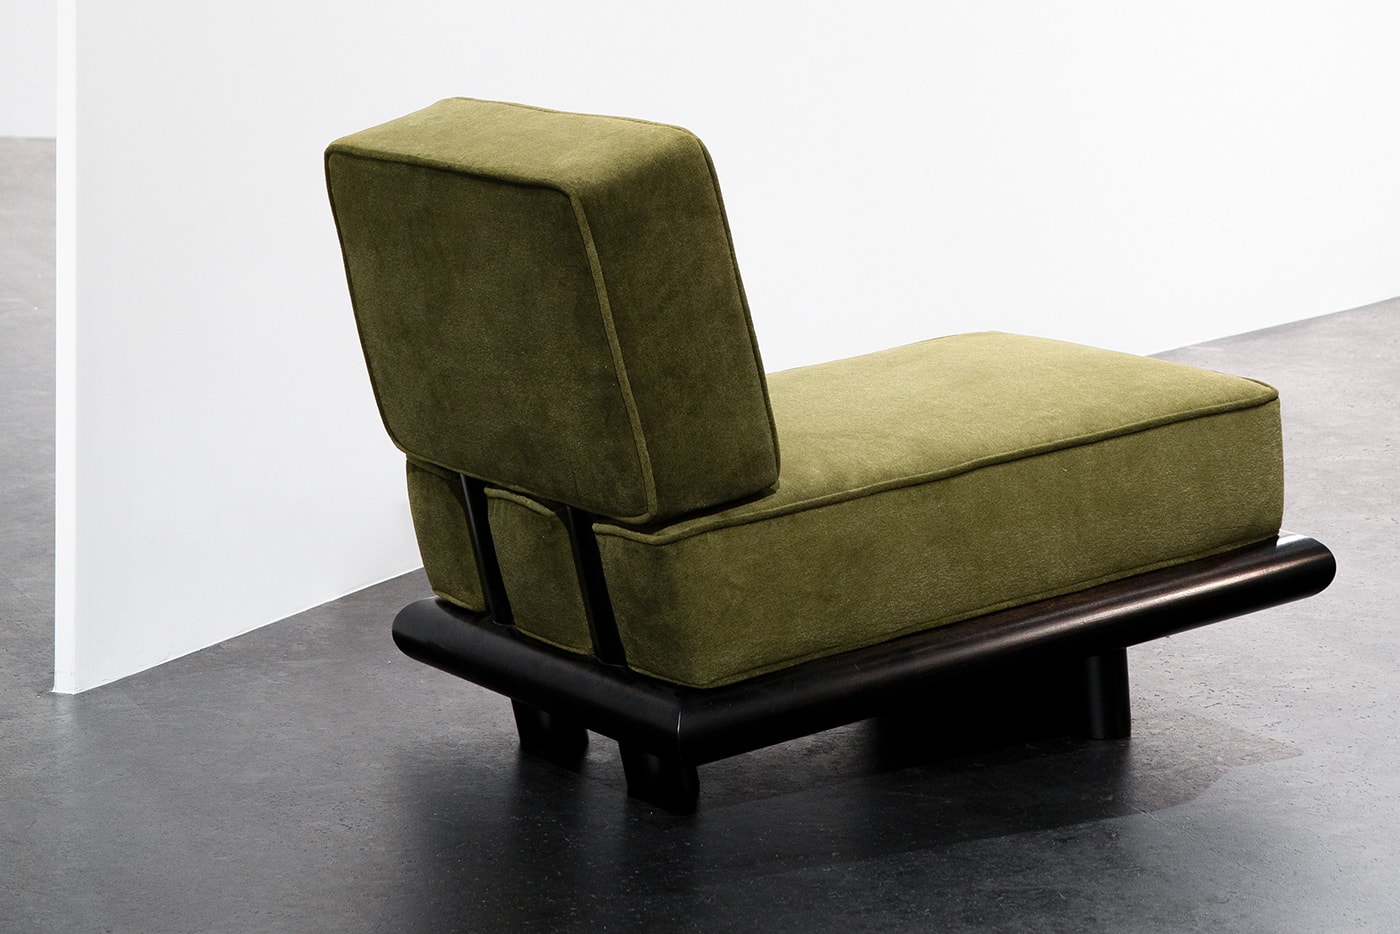 Ann Demeulemeester is Turning Her Attention to Furniture 